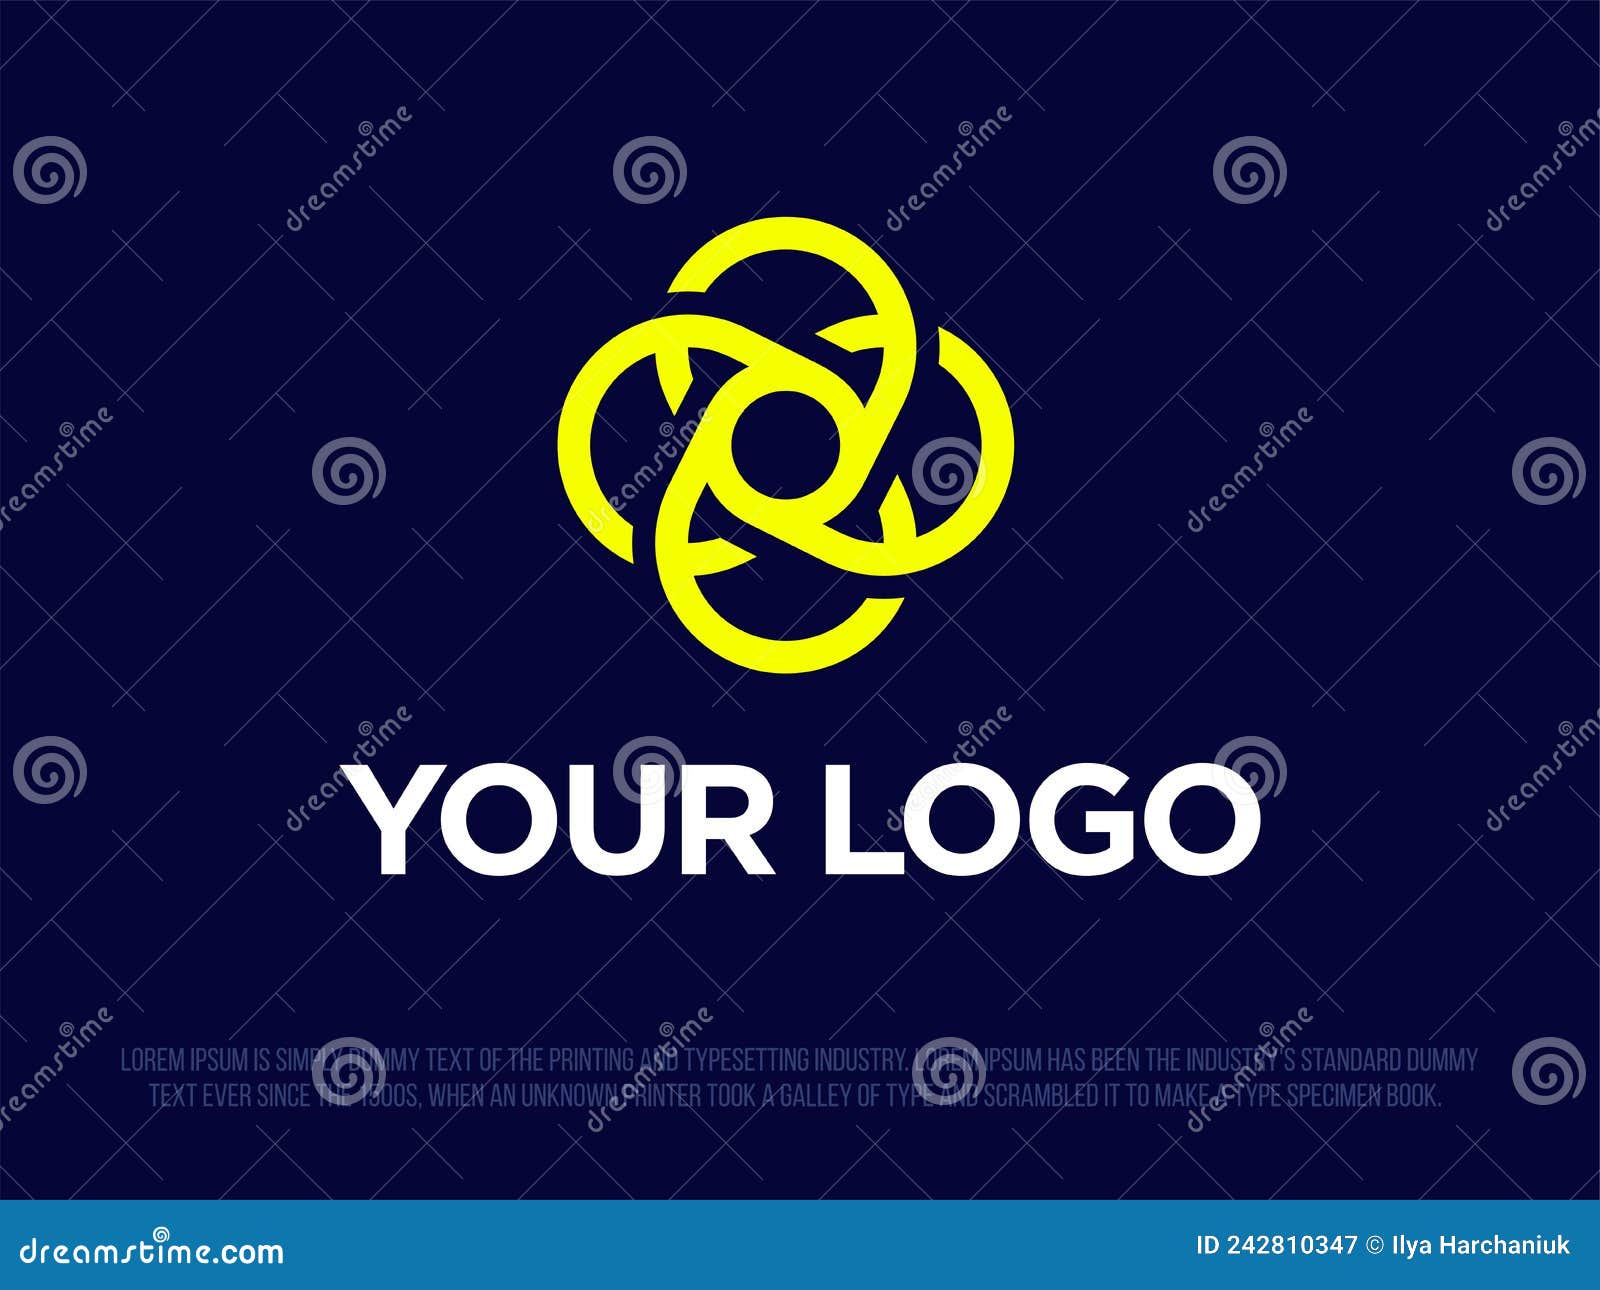 modern professional logo emblem with an image of a sphere